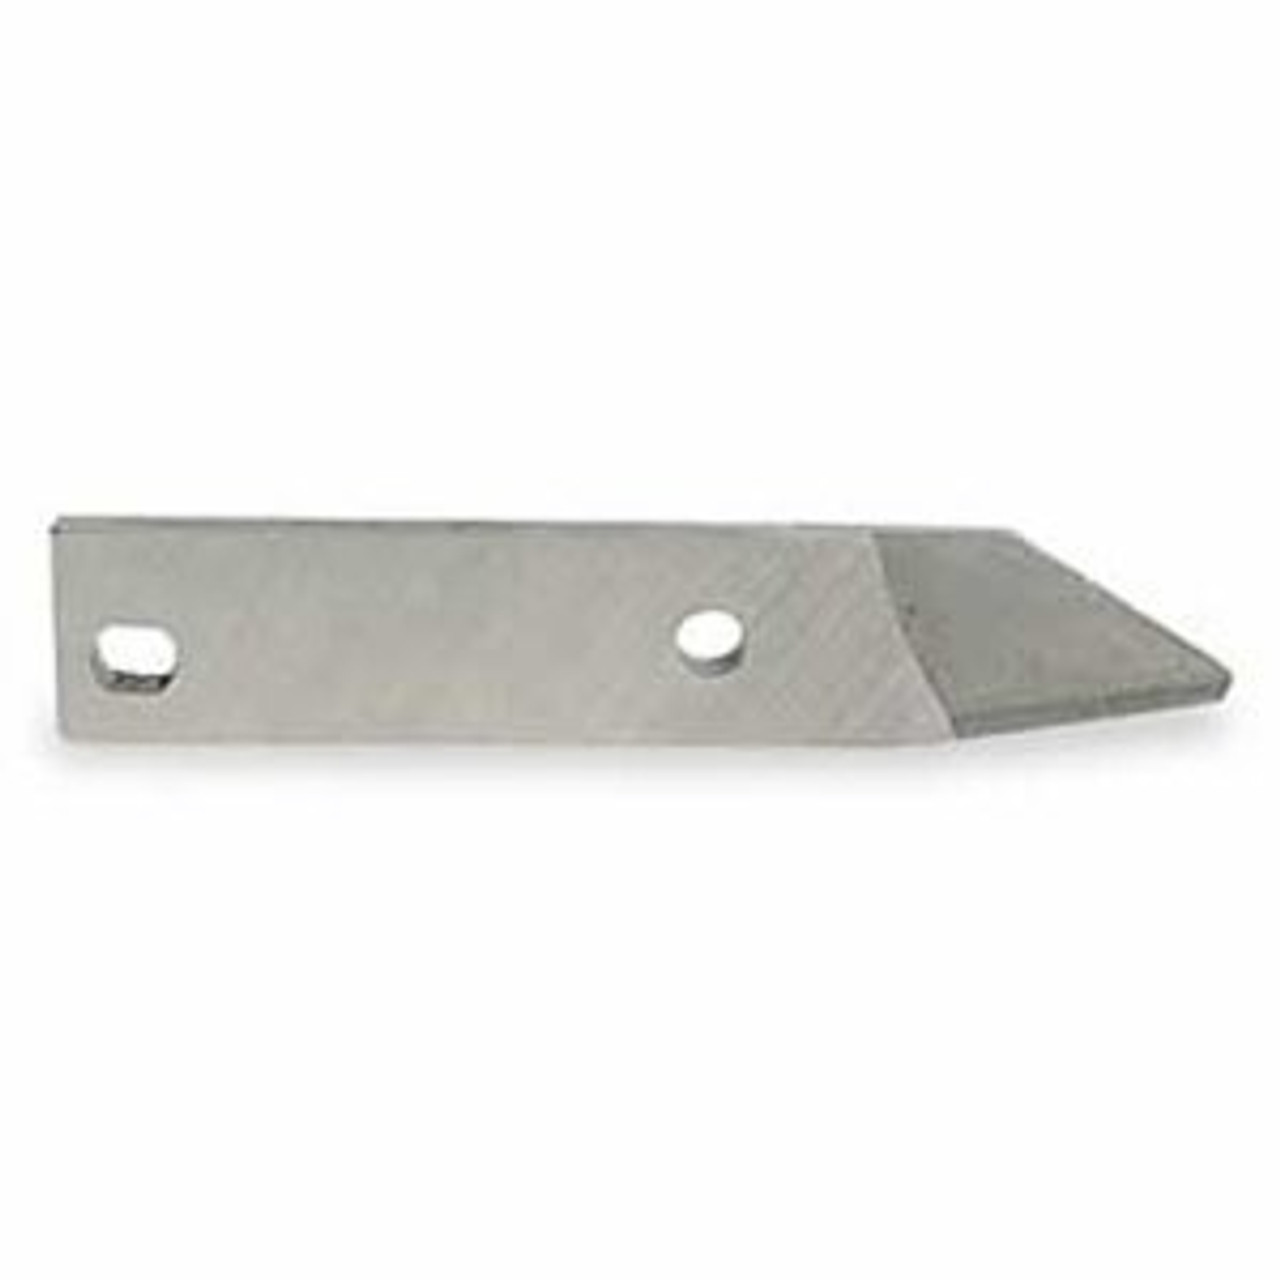 Right Shear Blade 18 Gauge No. 48-44-0171 Whitehead Industrial Hardware